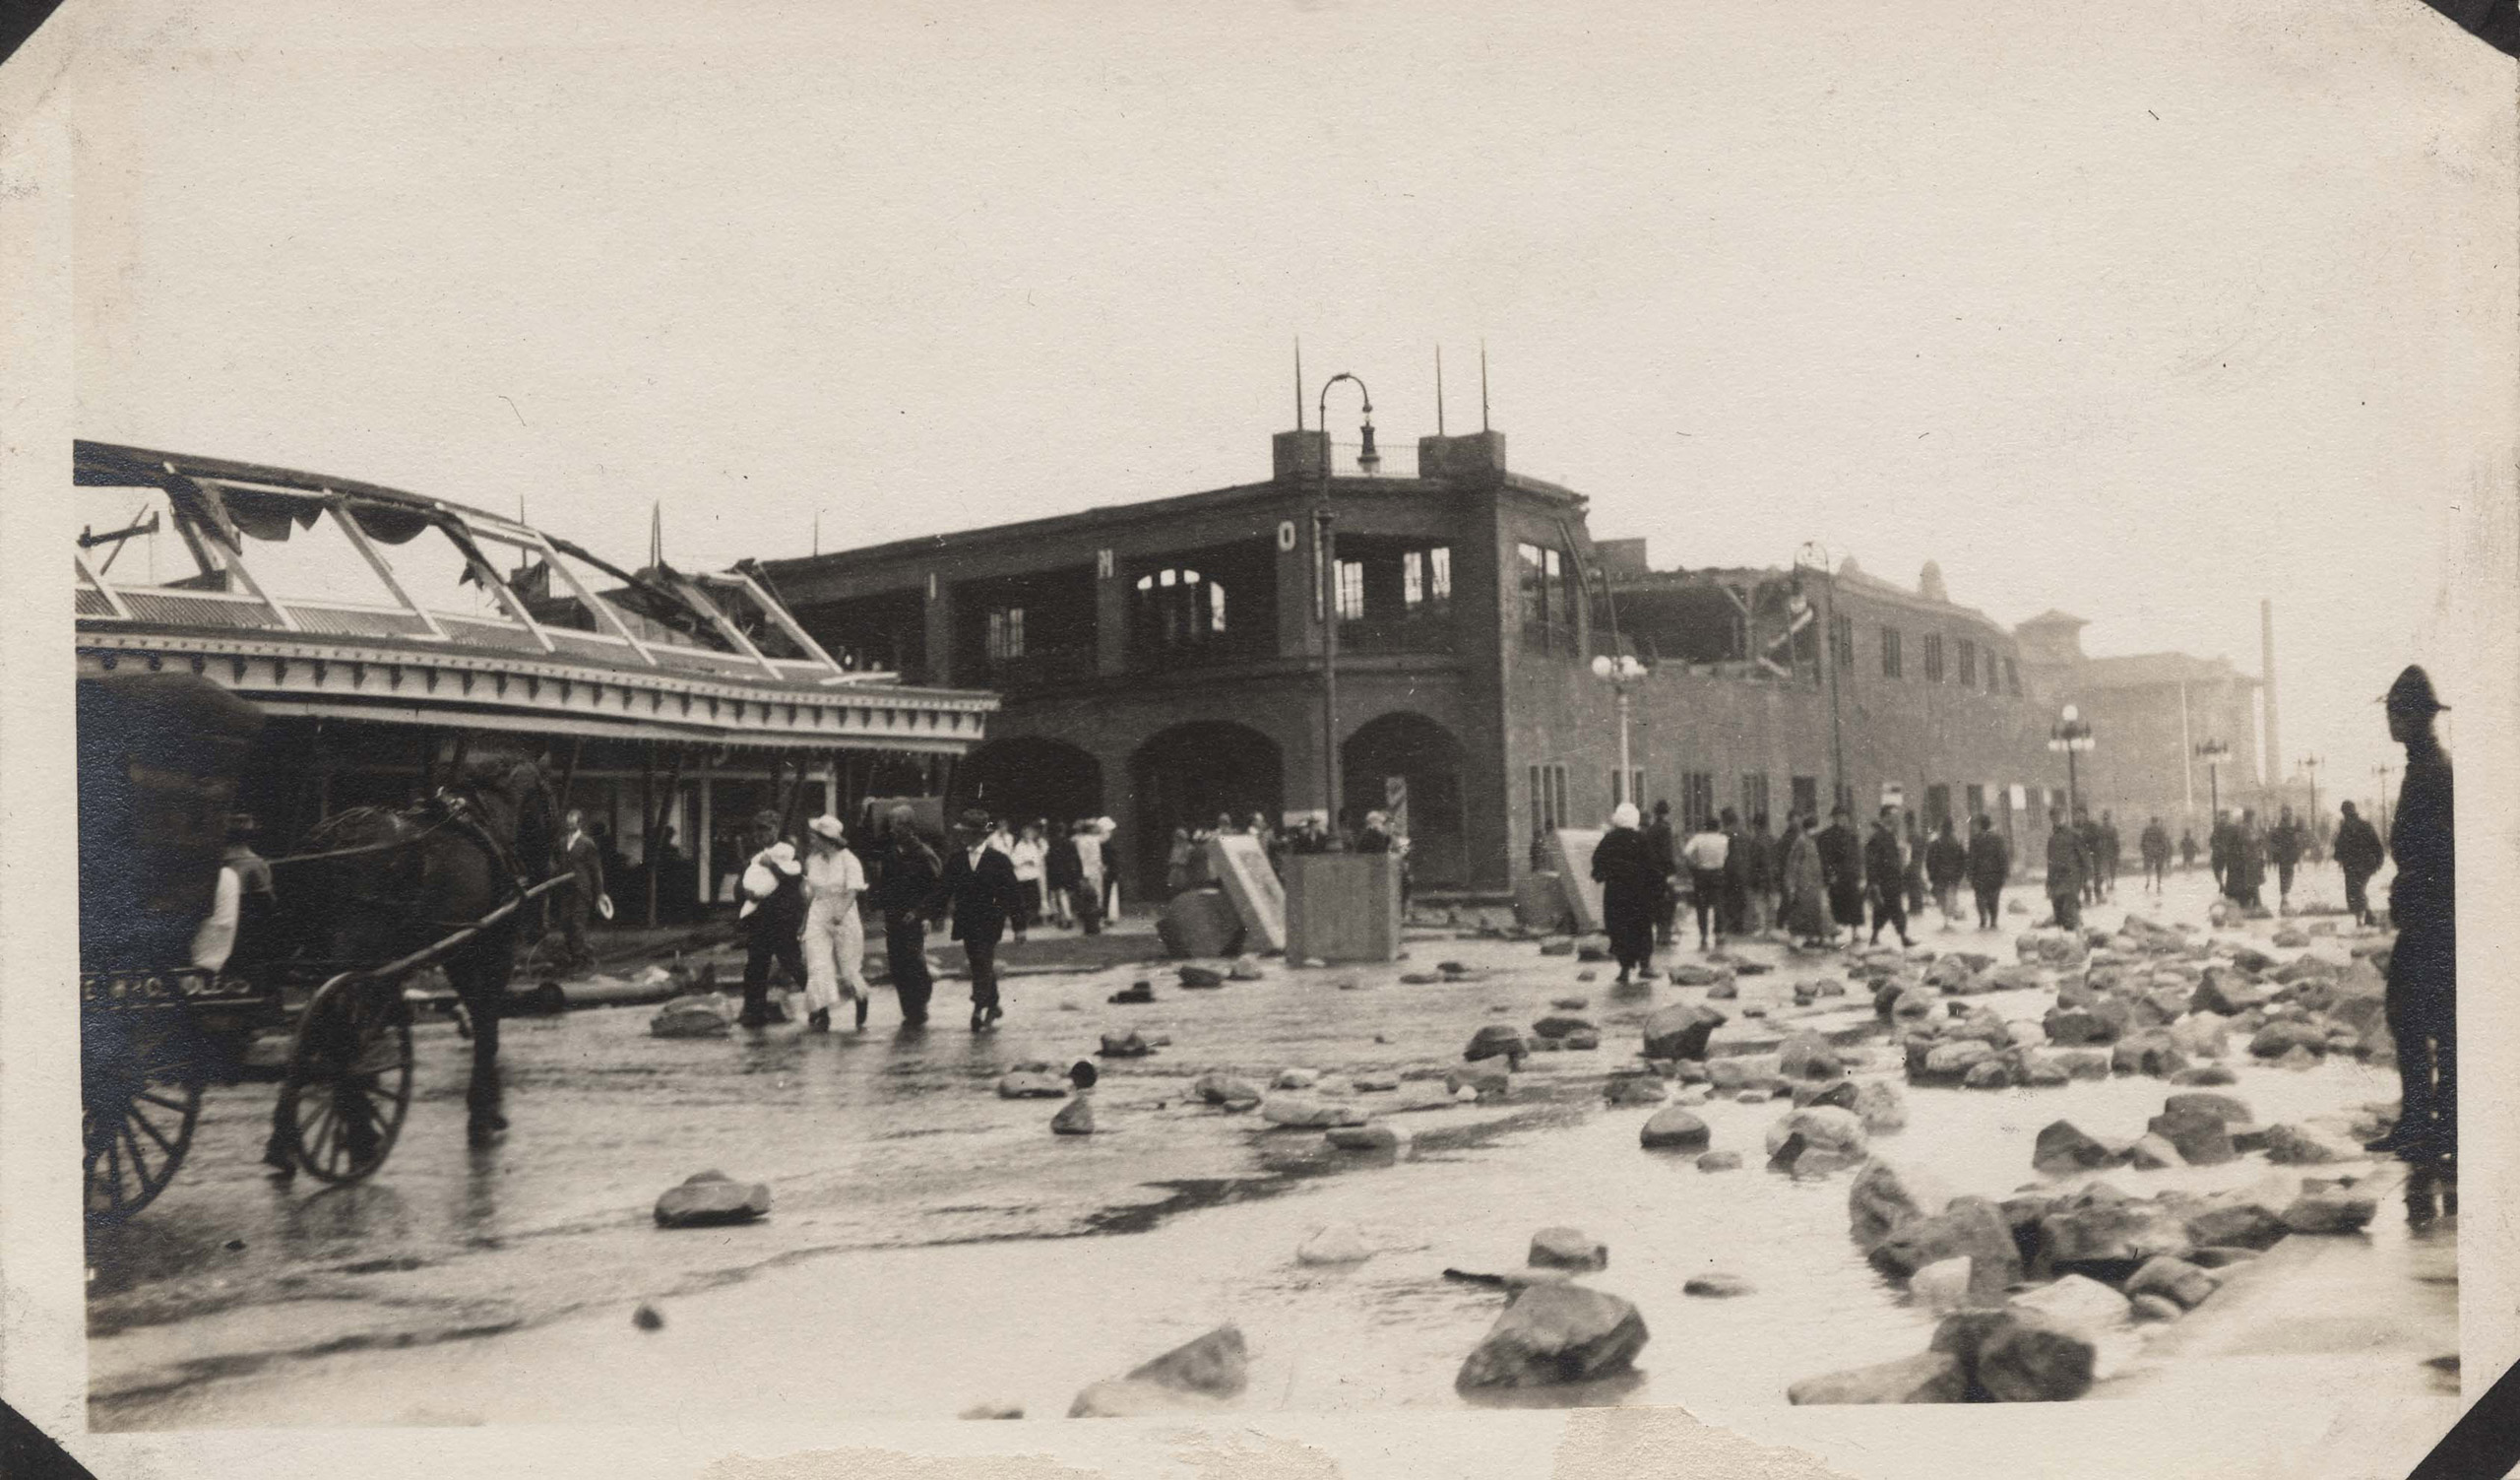 Colombo Cafe and Casino wreckage on Beach Boulevard after the hurricane.